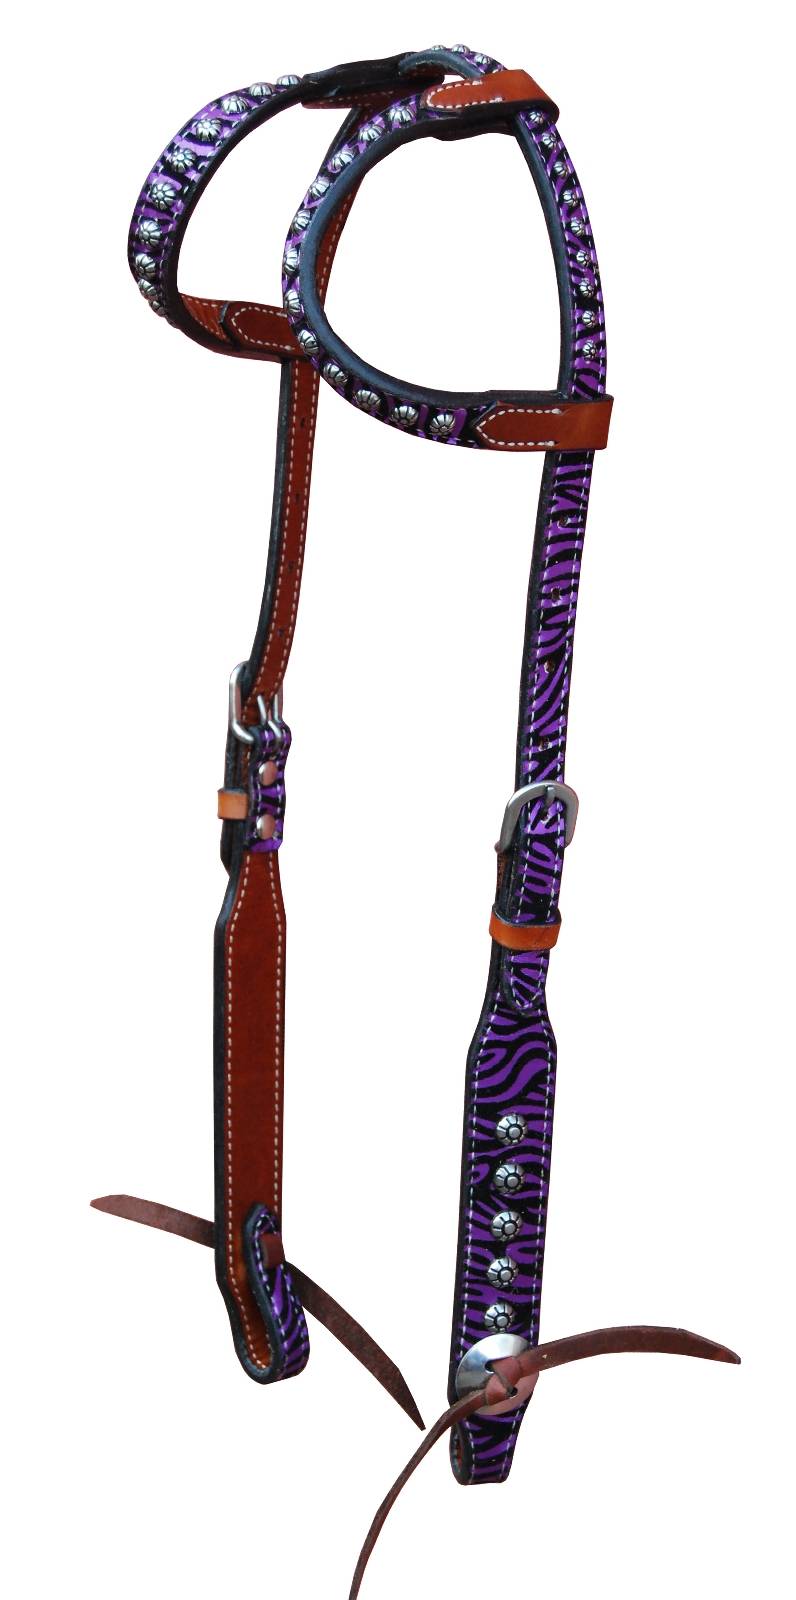 468858PUR HRSE Turn-Two Double Ear Headstall - Chasing Wild sku 468858PUR HRSE